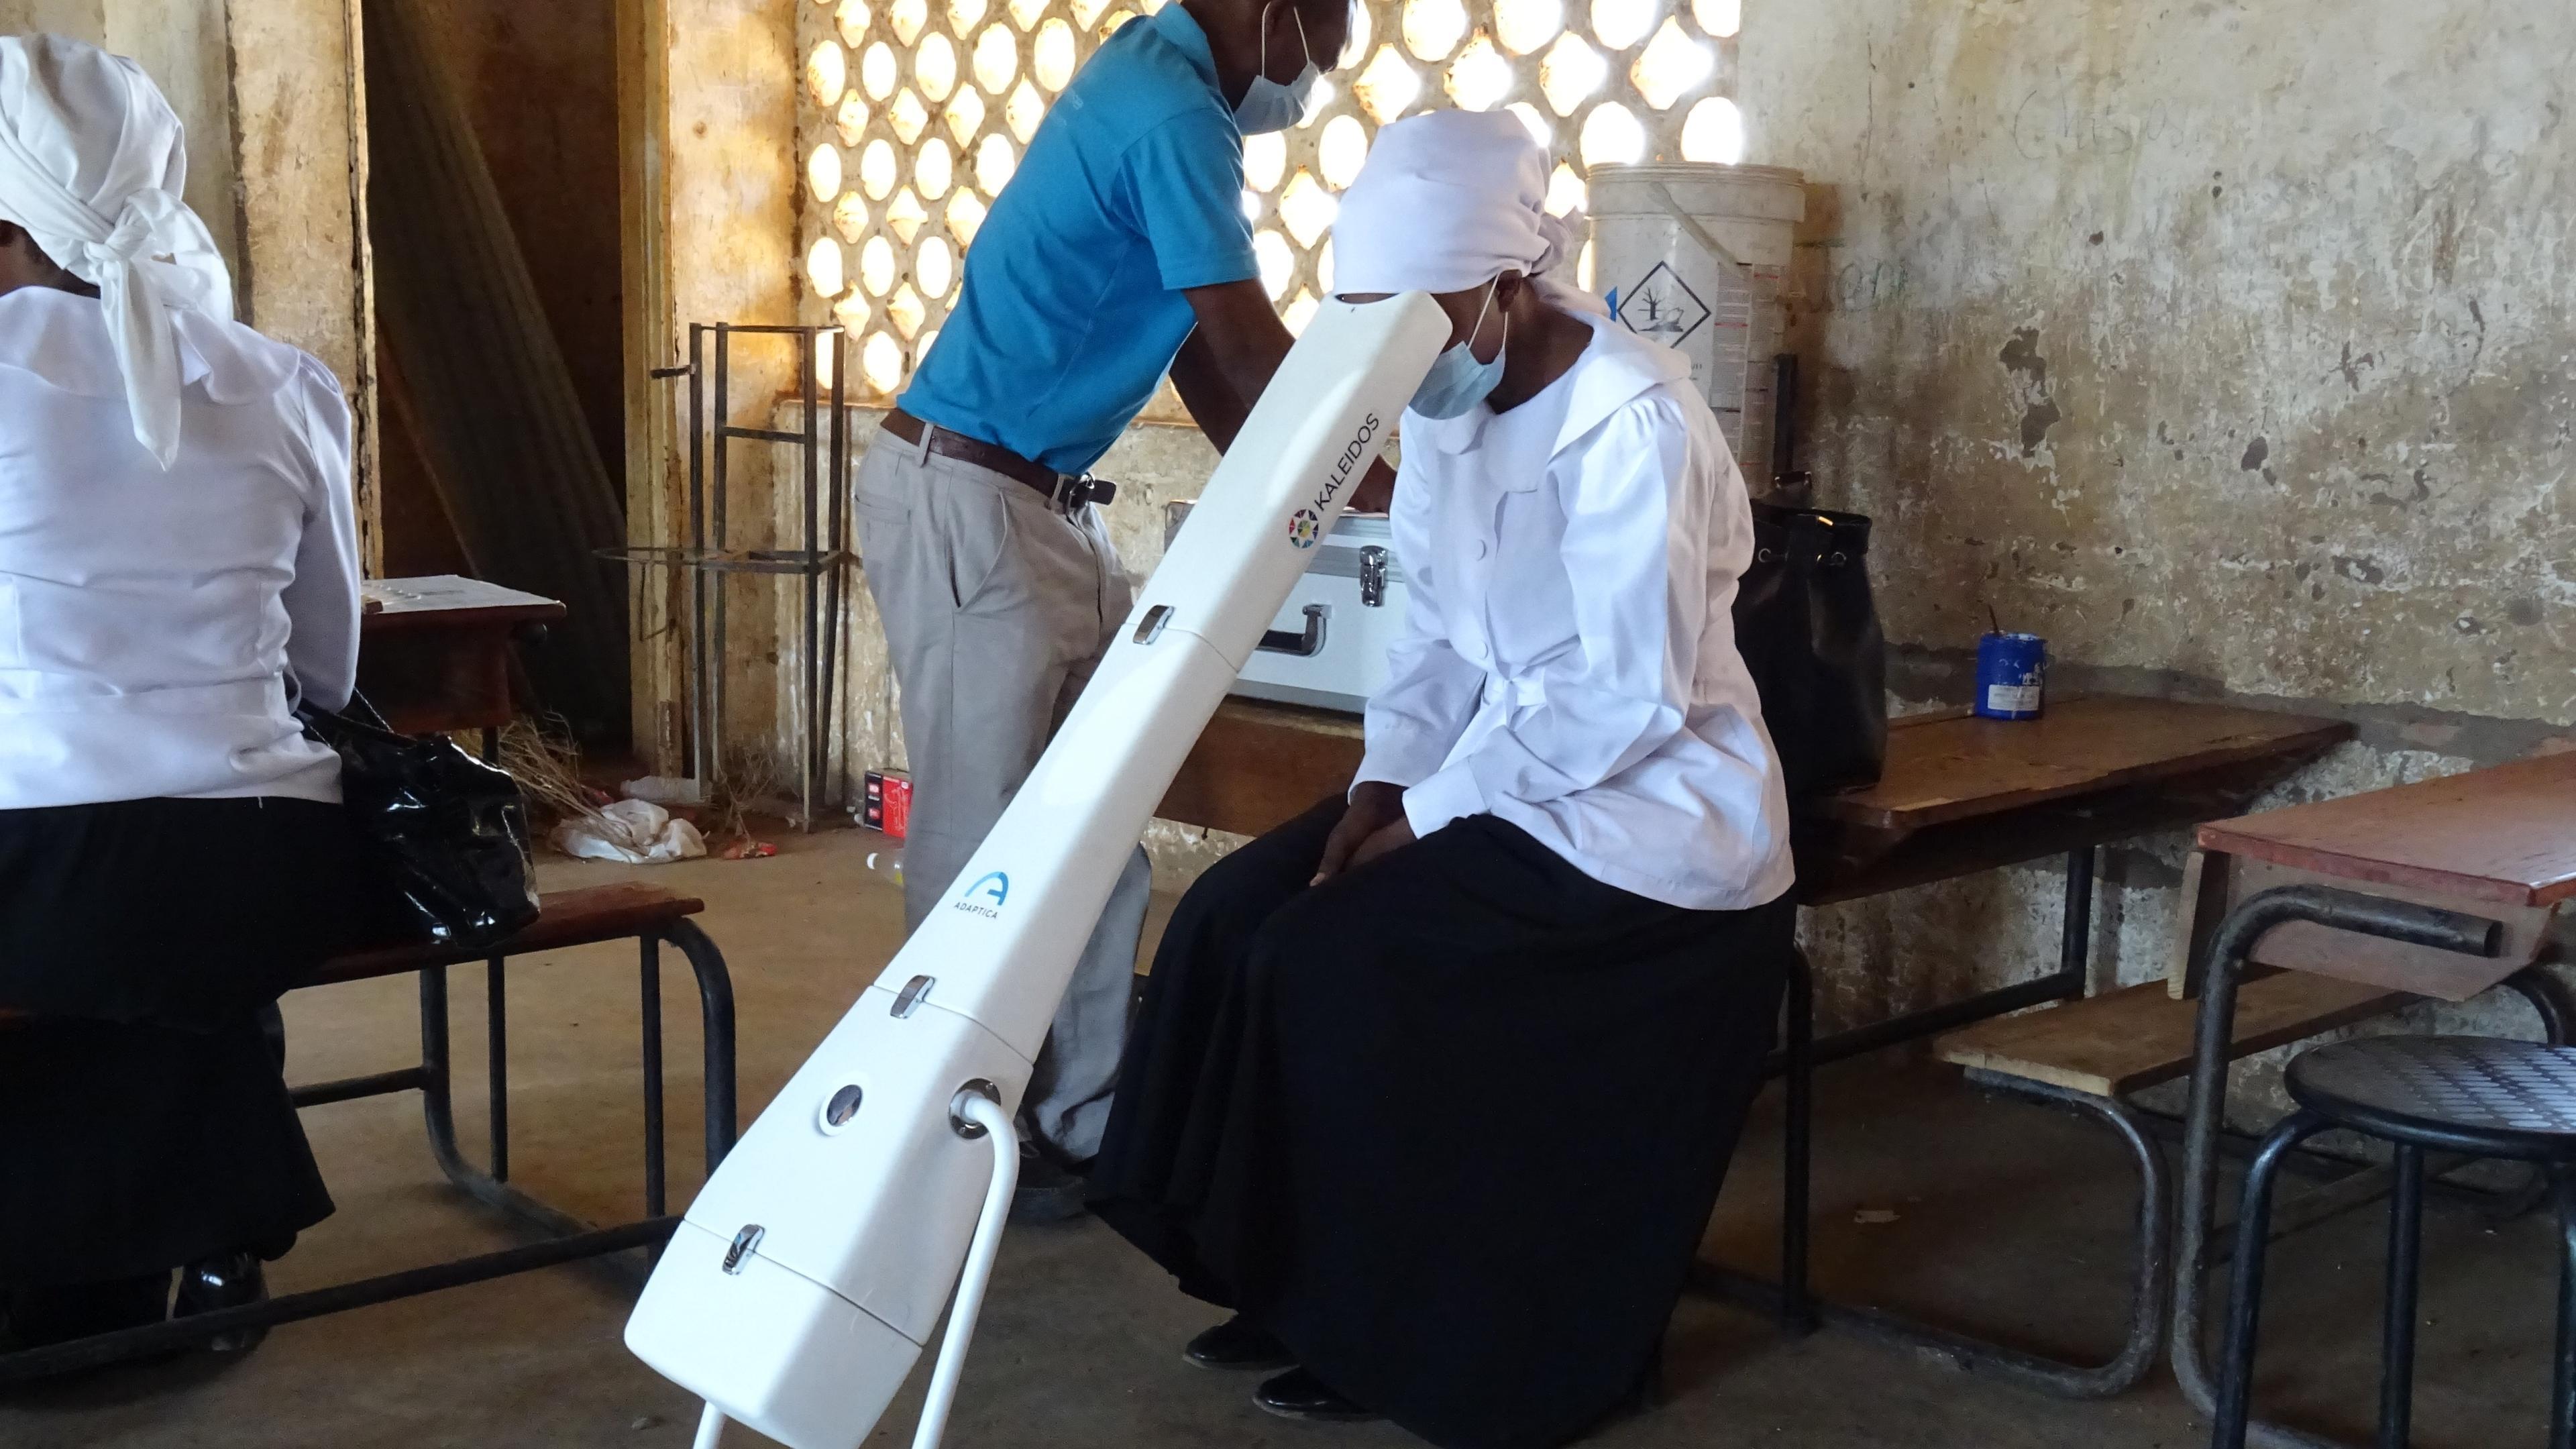 A woman looks into the Kaleidos autorefractometer